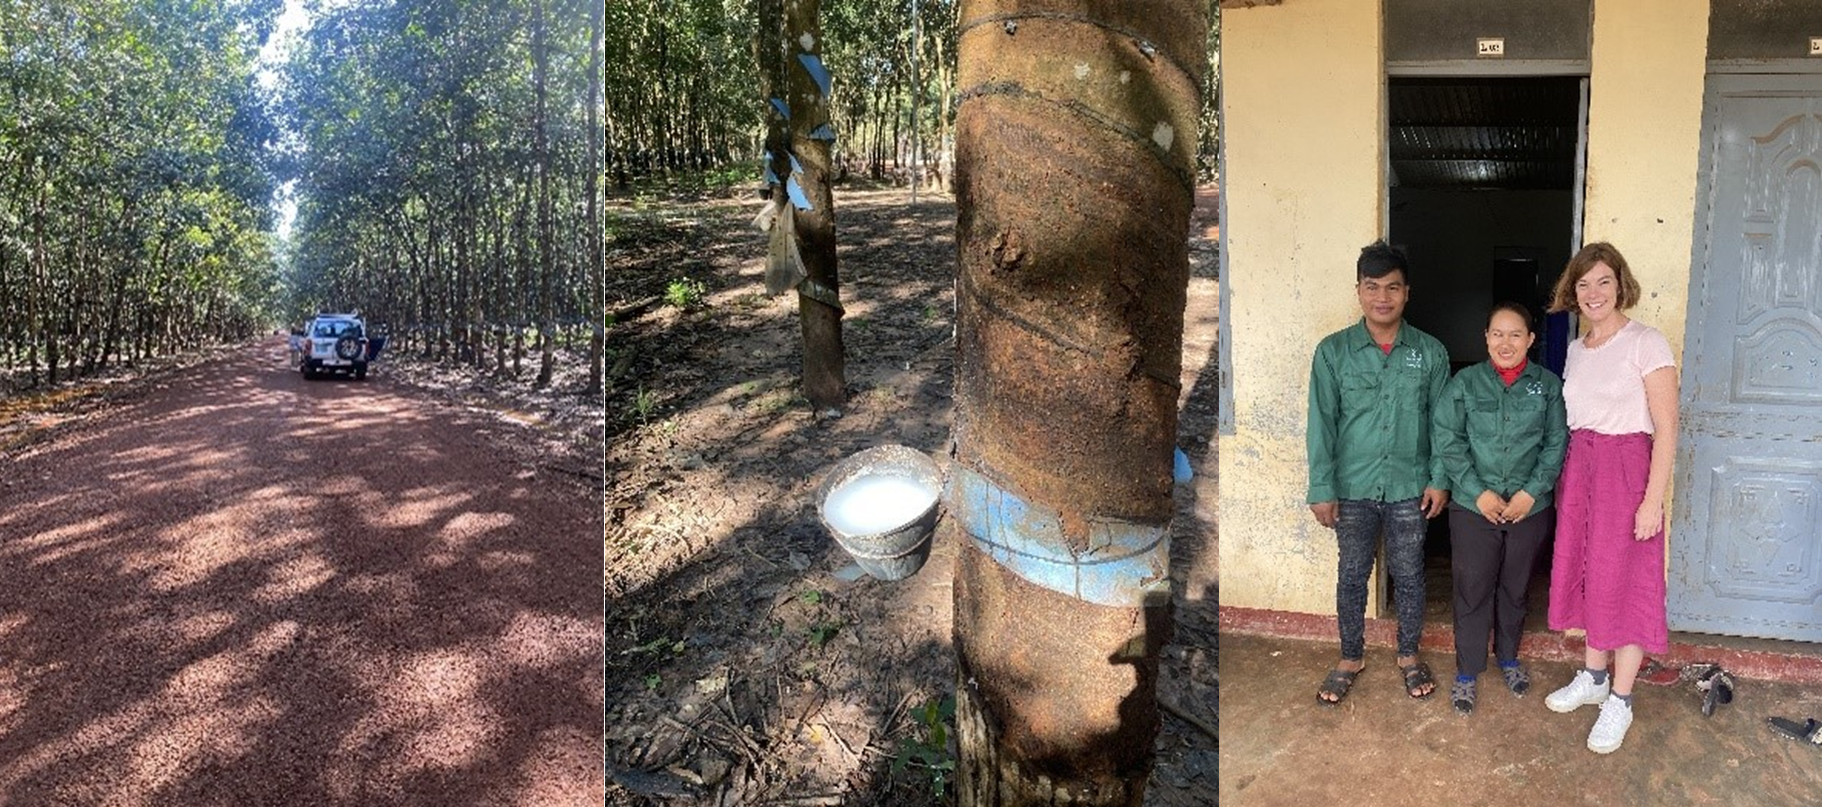 Project Update – Insights from the Ground Up: Gender Equality and Responsible Agriculture Investment in Cambodia’s Rubber Sector